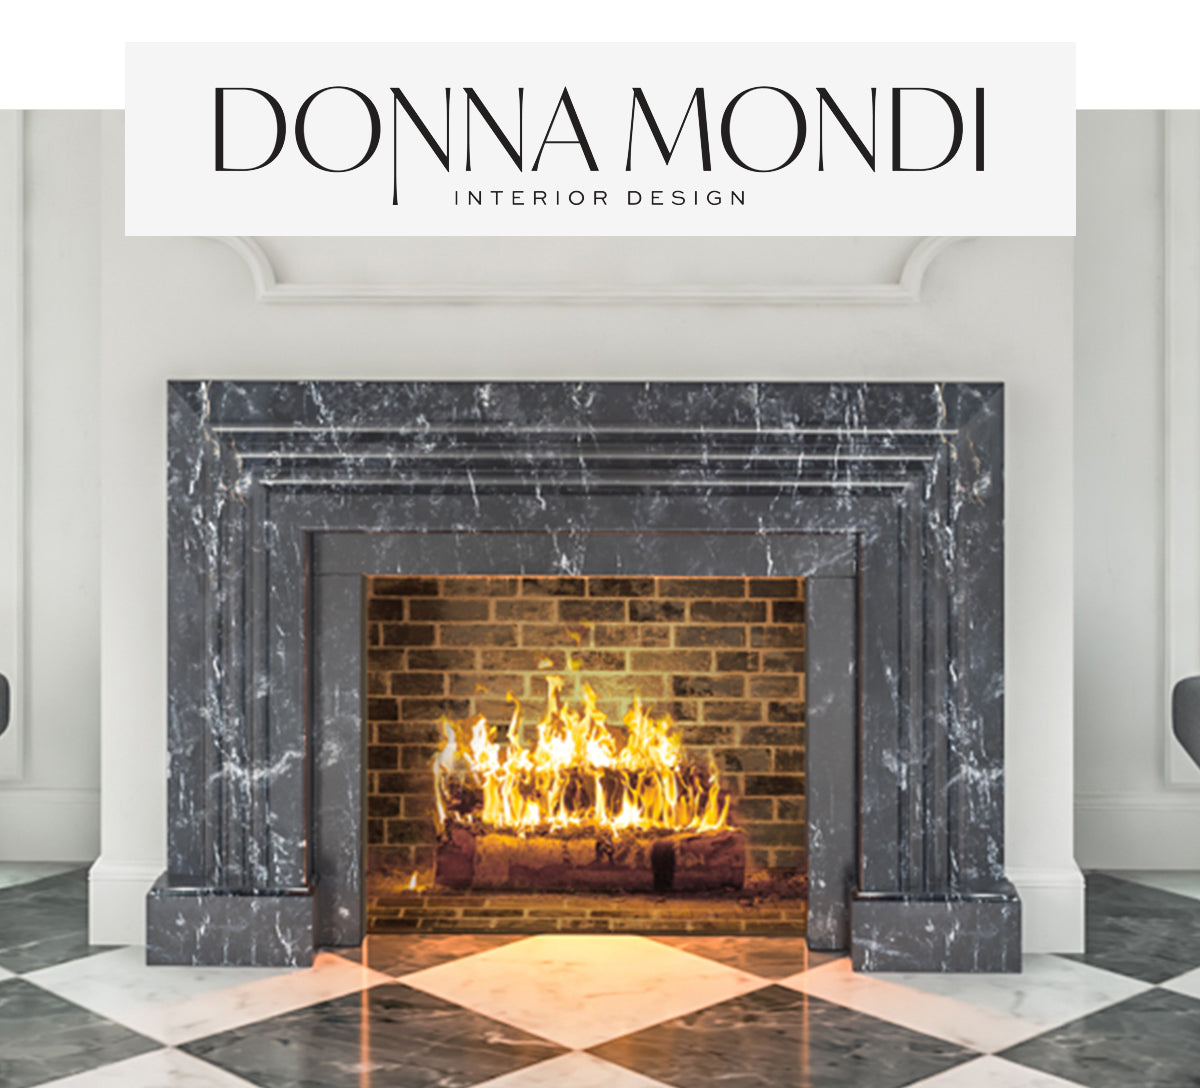 Introducing An Exclusive Fireplace & Furniture Collection In Collaboration With Donna Mondi